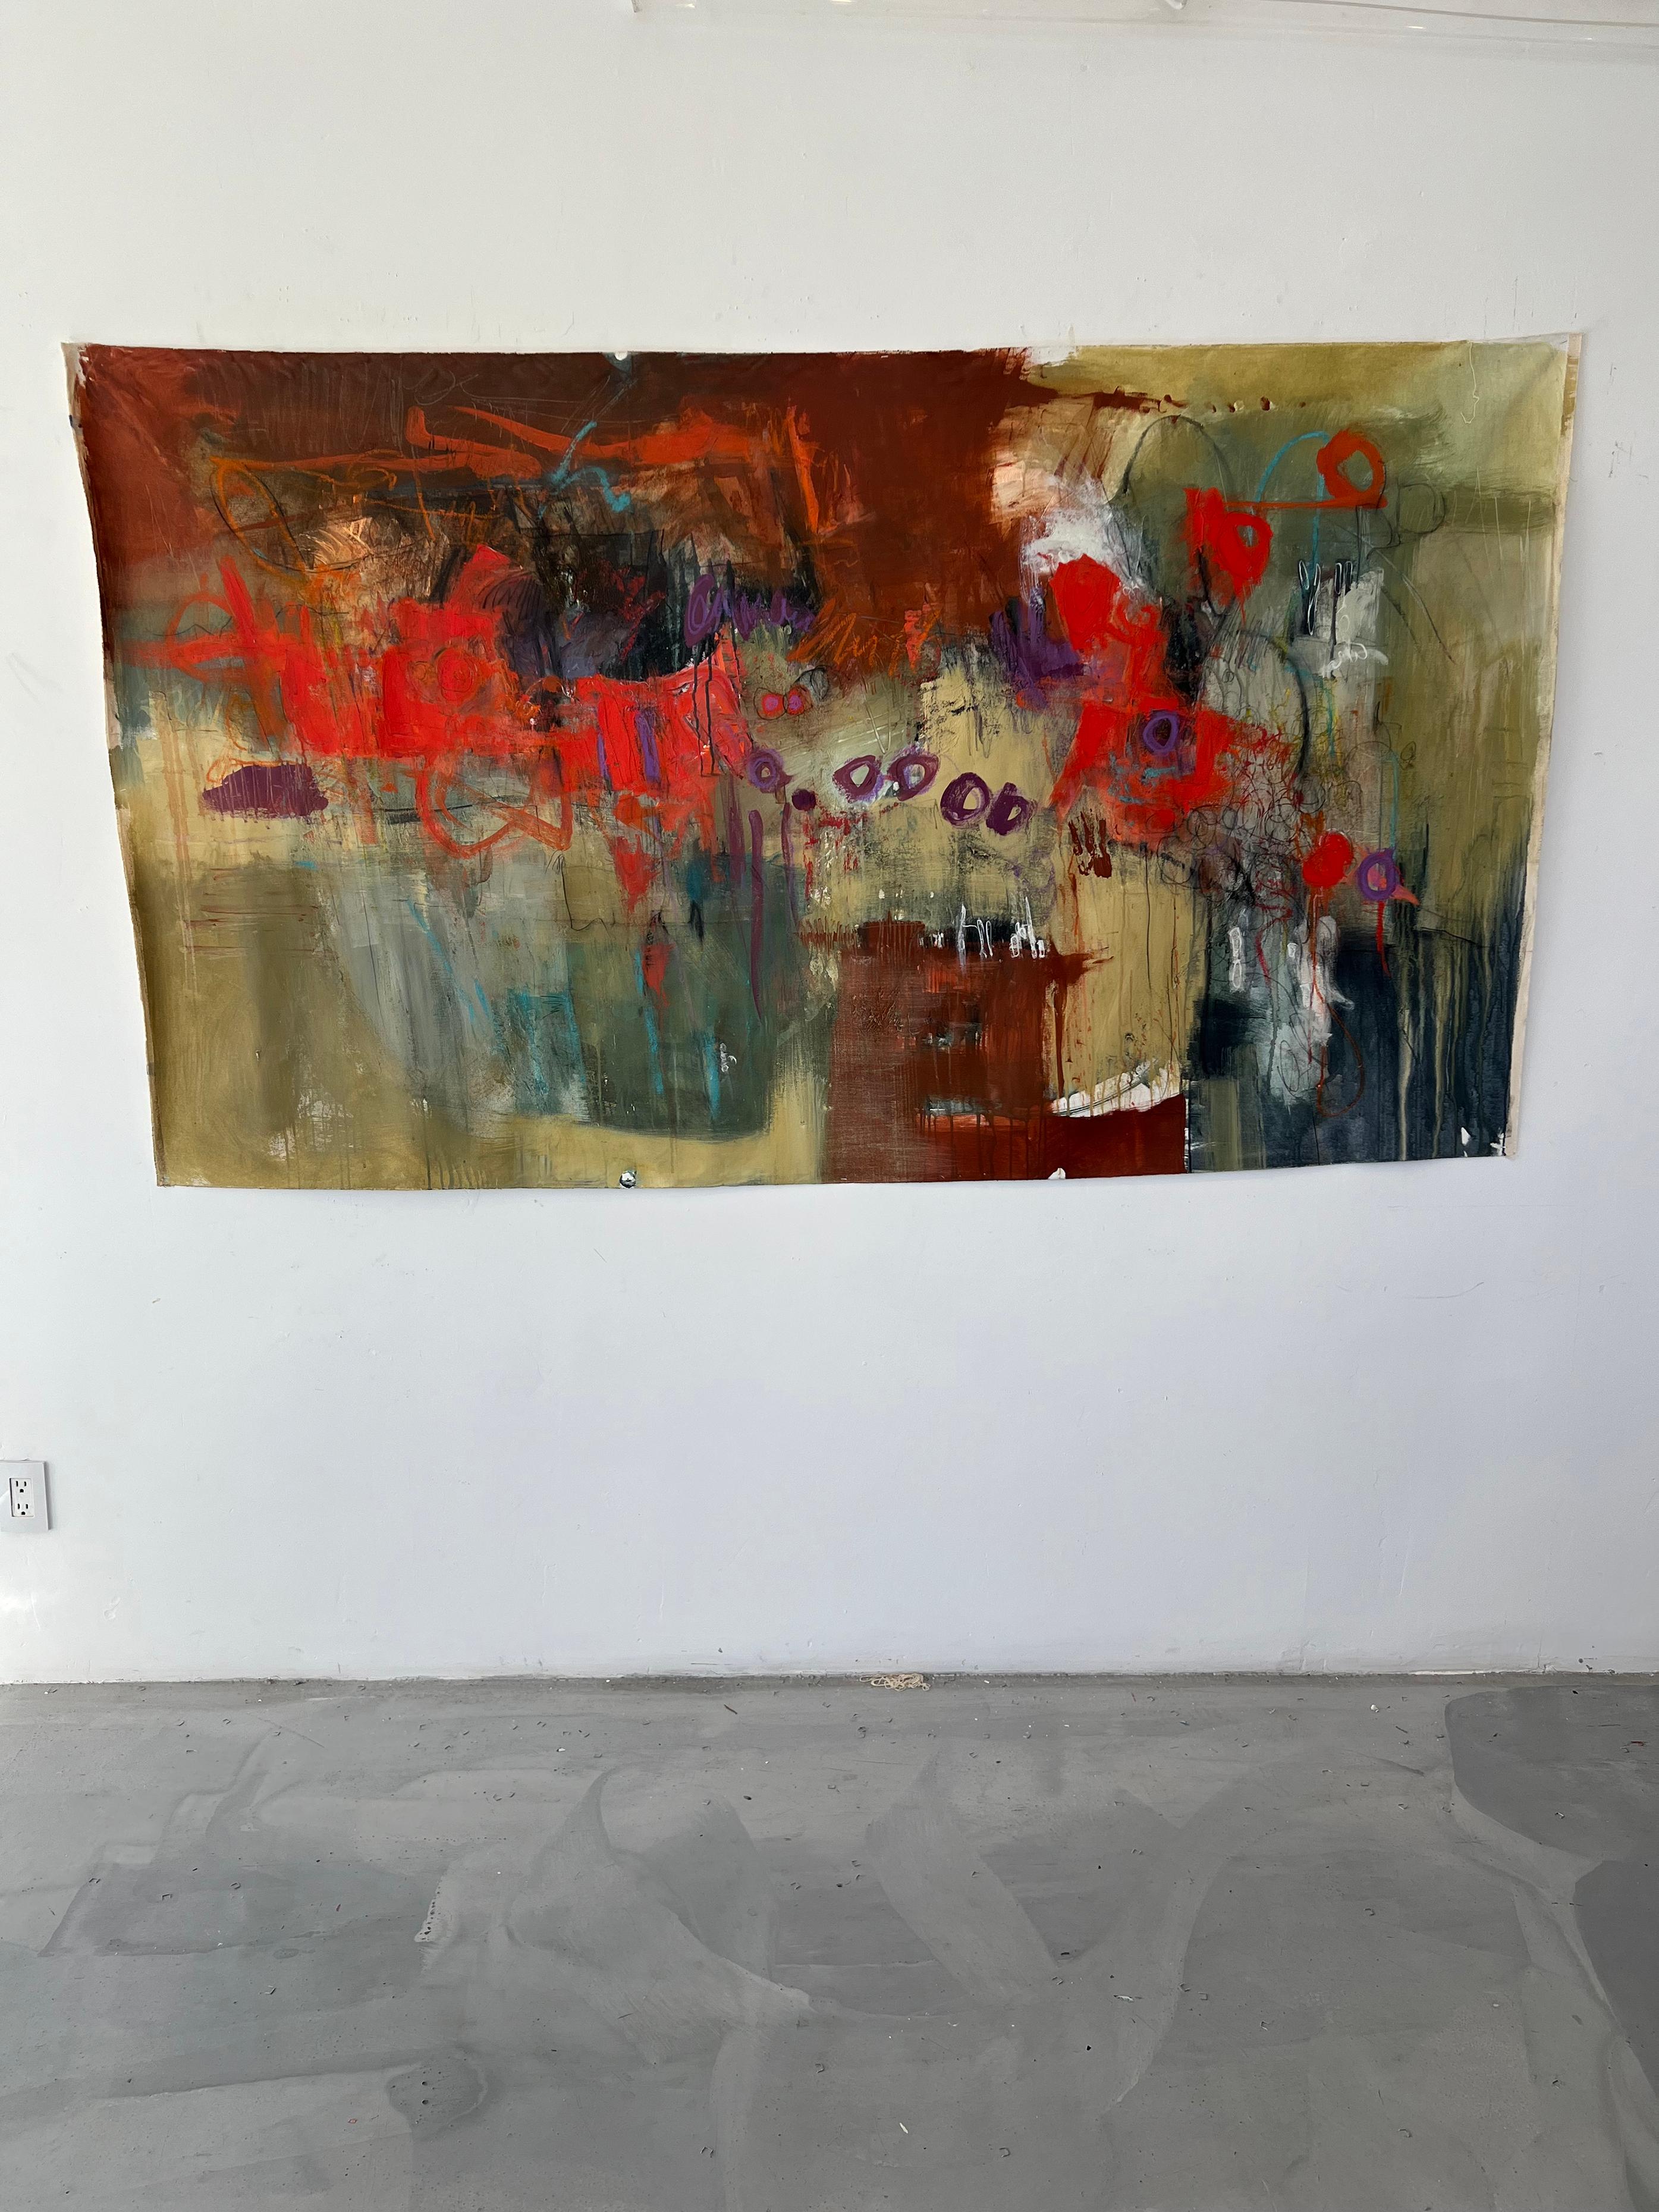 Montreat Series: Untitled  - acrylic on canvas - Abstract Painting by Stephanie Visser 